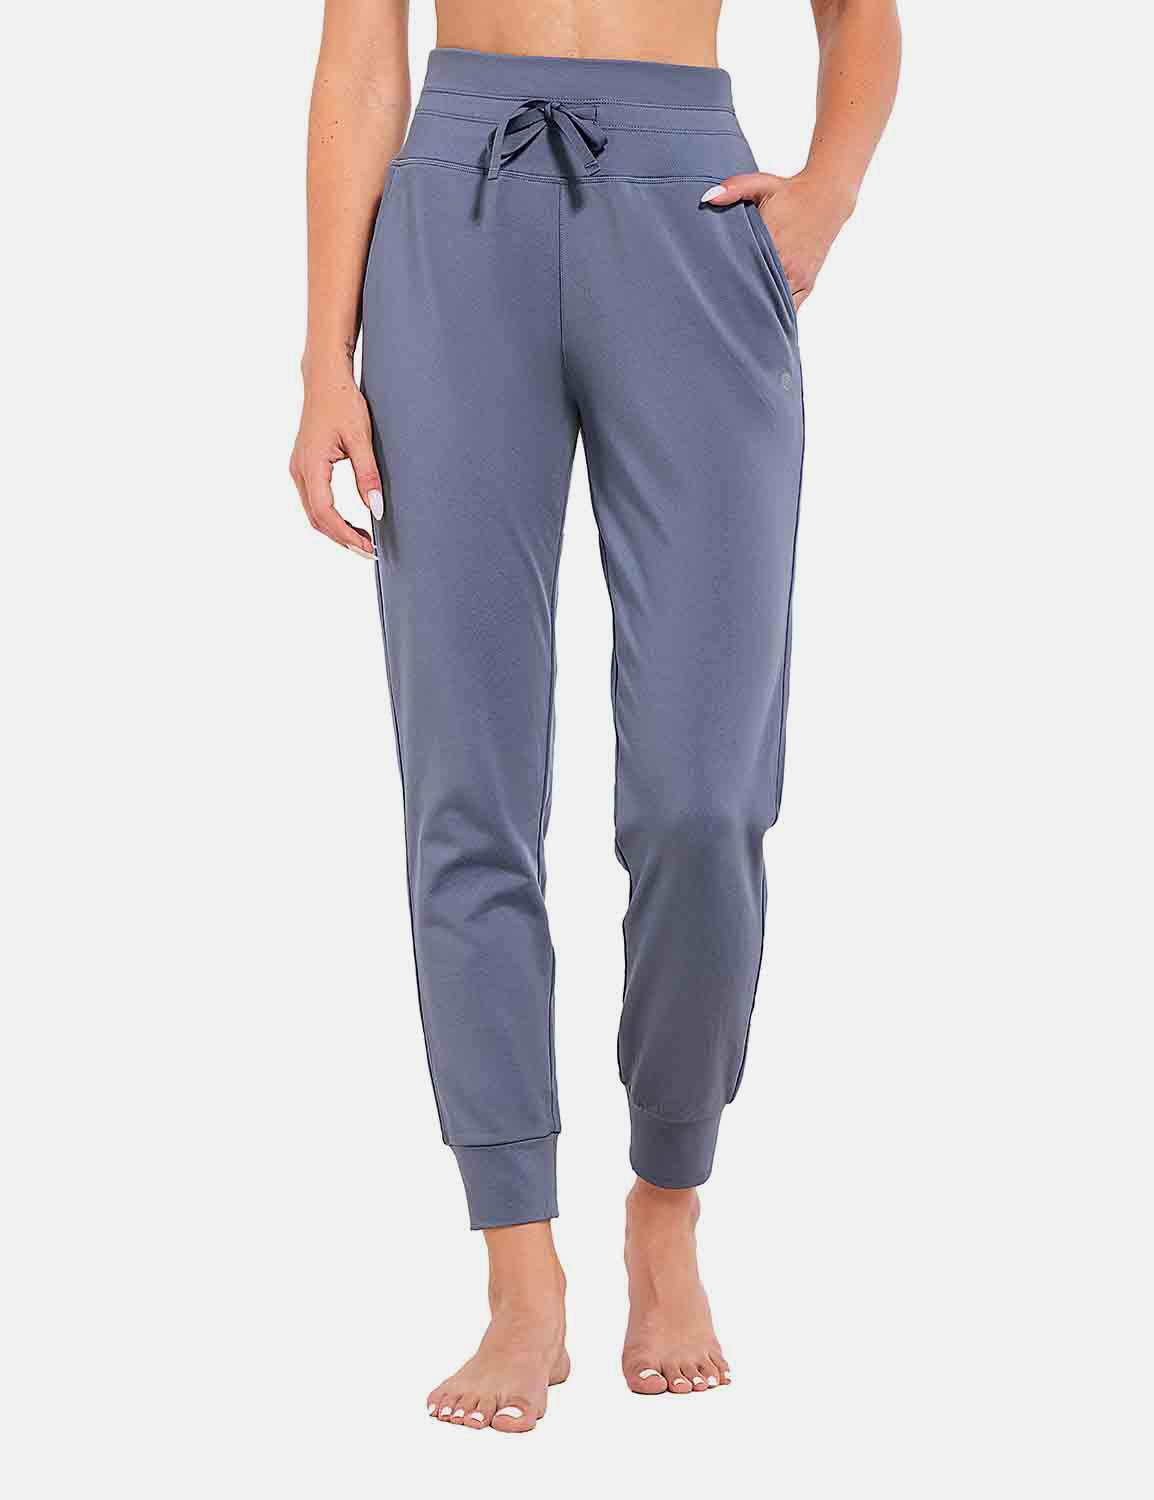 Baleaf Women's High Rise Water Resistant Tapered Joggers